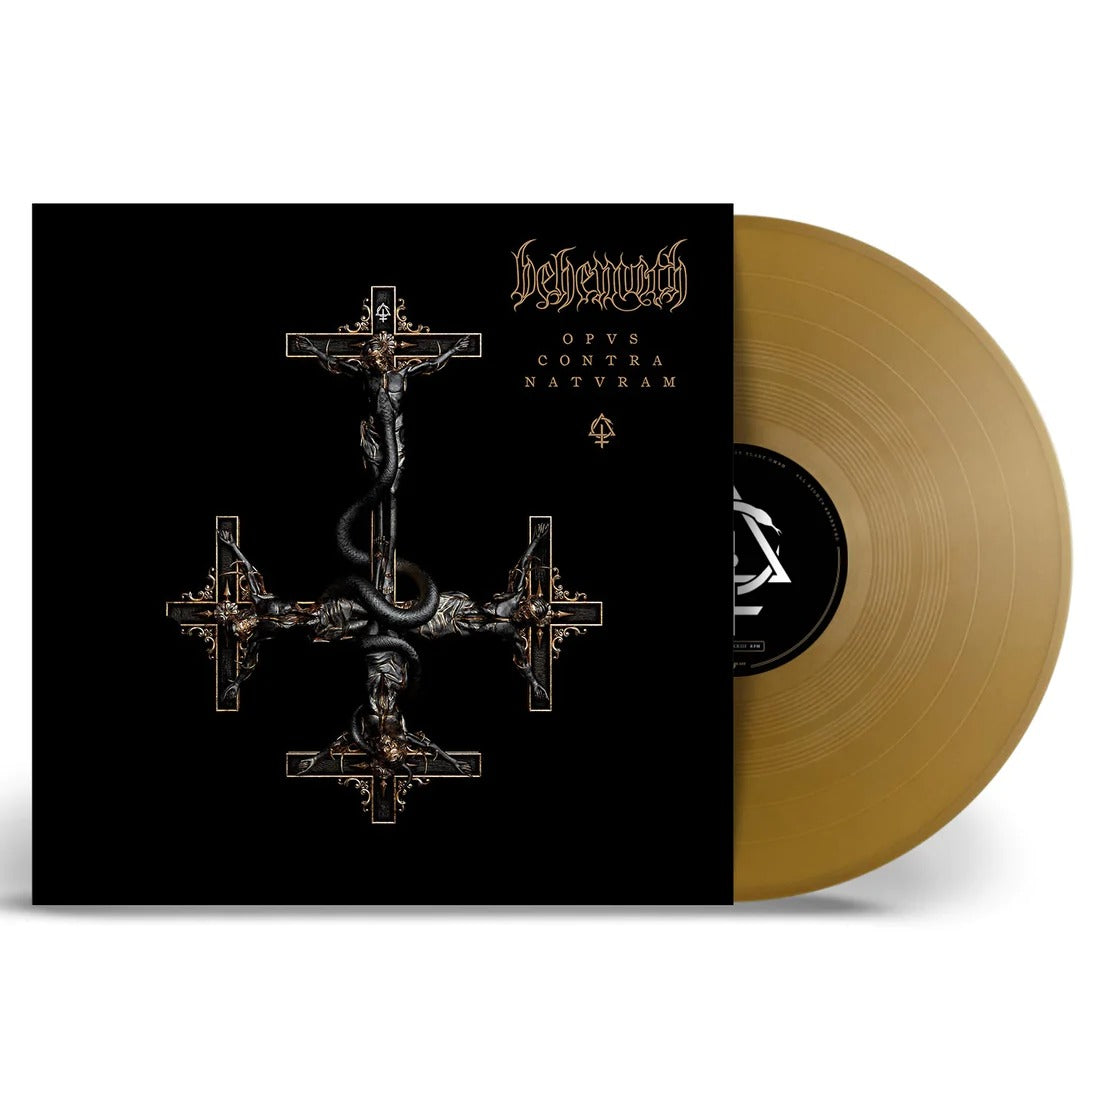 REVOLVER x BEHEMOTH COLLECTOR'S BUNDLE HAND-NUMBERED SLIPCASE W/ LIMITED-EDITION 'OPVS CONTRA NATVRAM' GOLD LP - ONLY 100 AVAILABLE